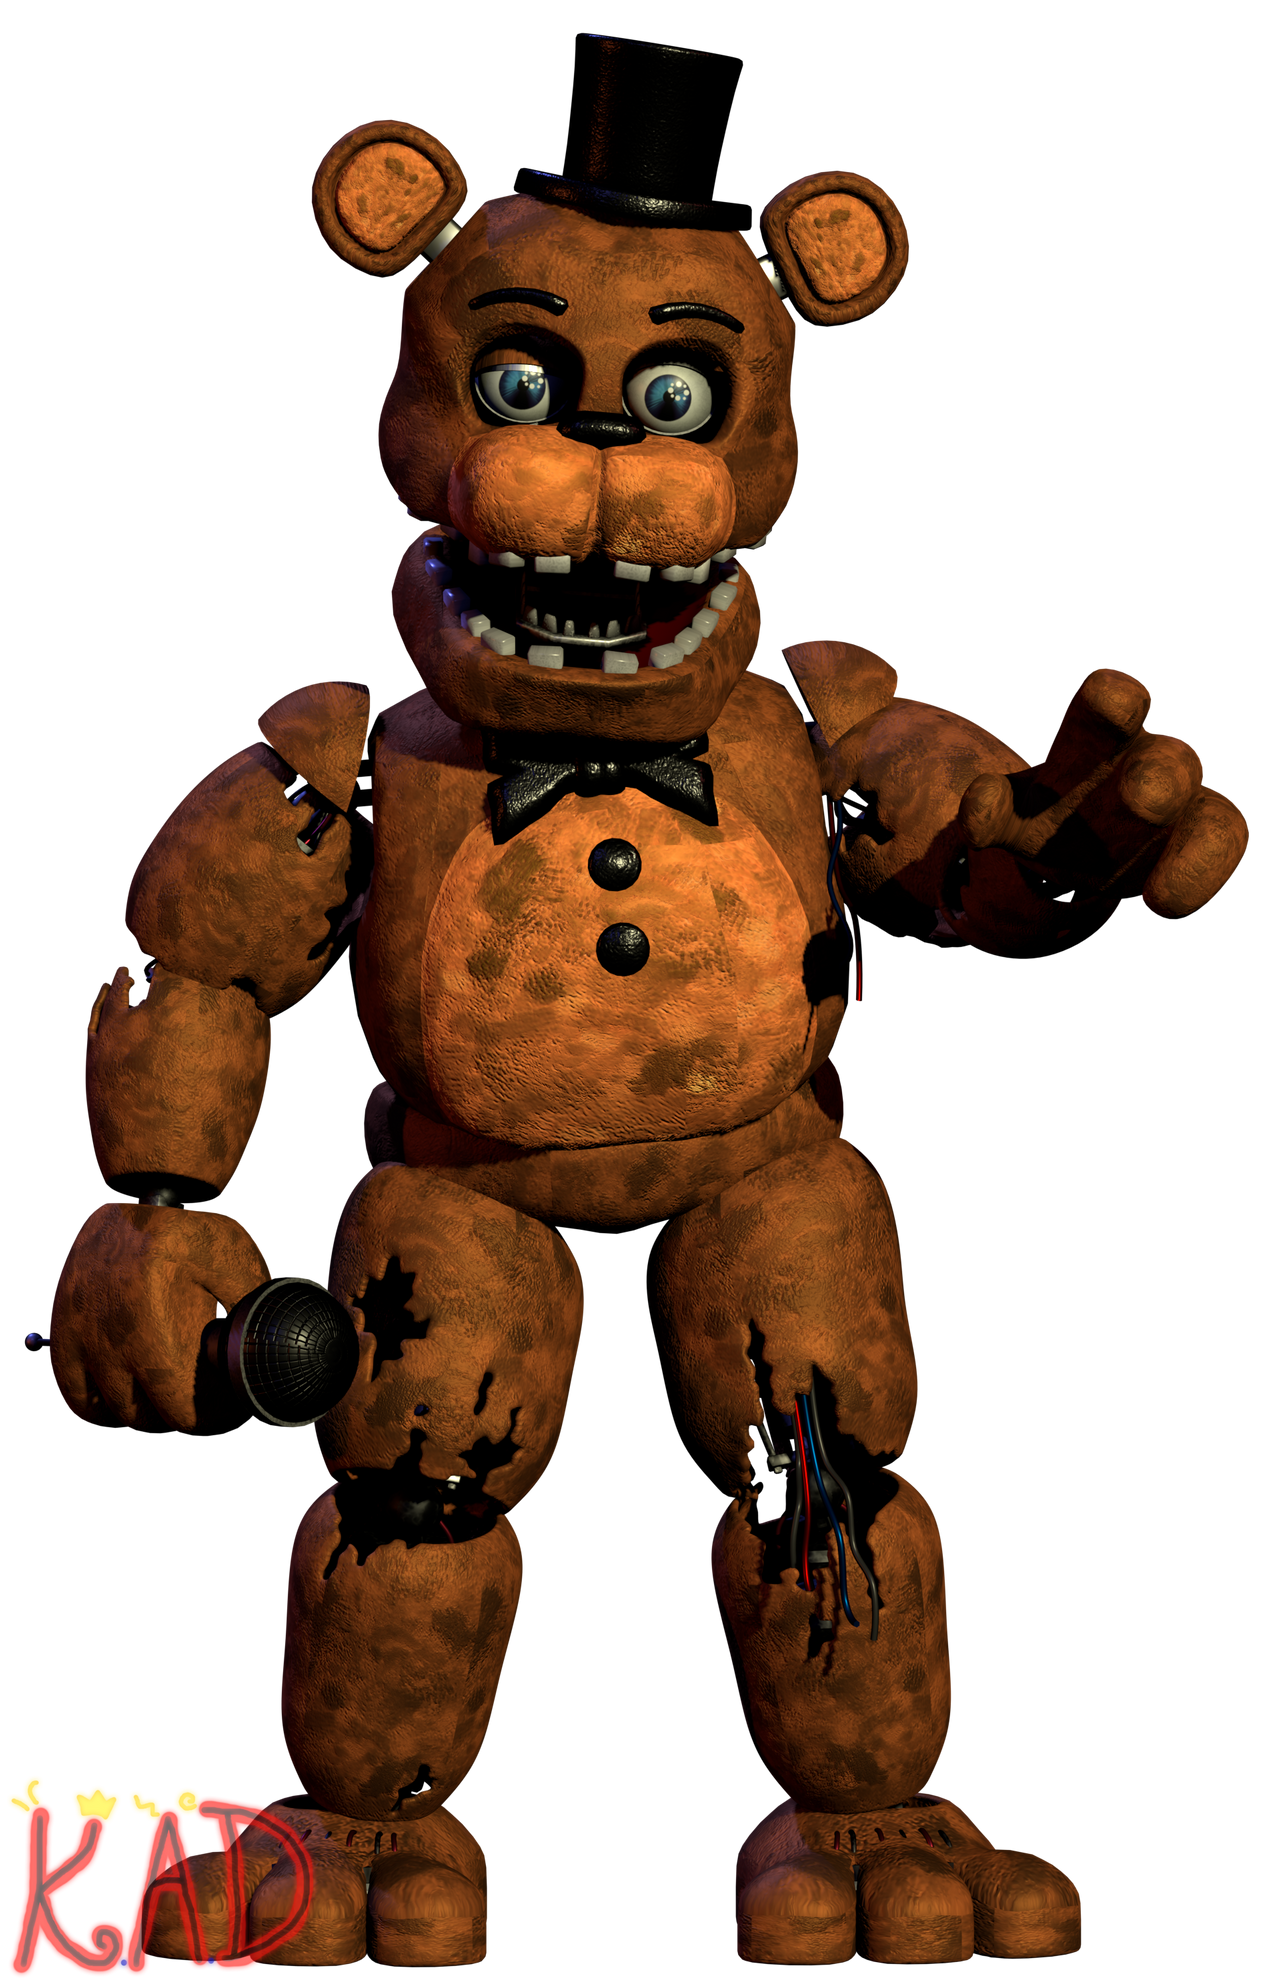 Who is more popular, Withered Freddy or FNaF 1 Freddy? I love both